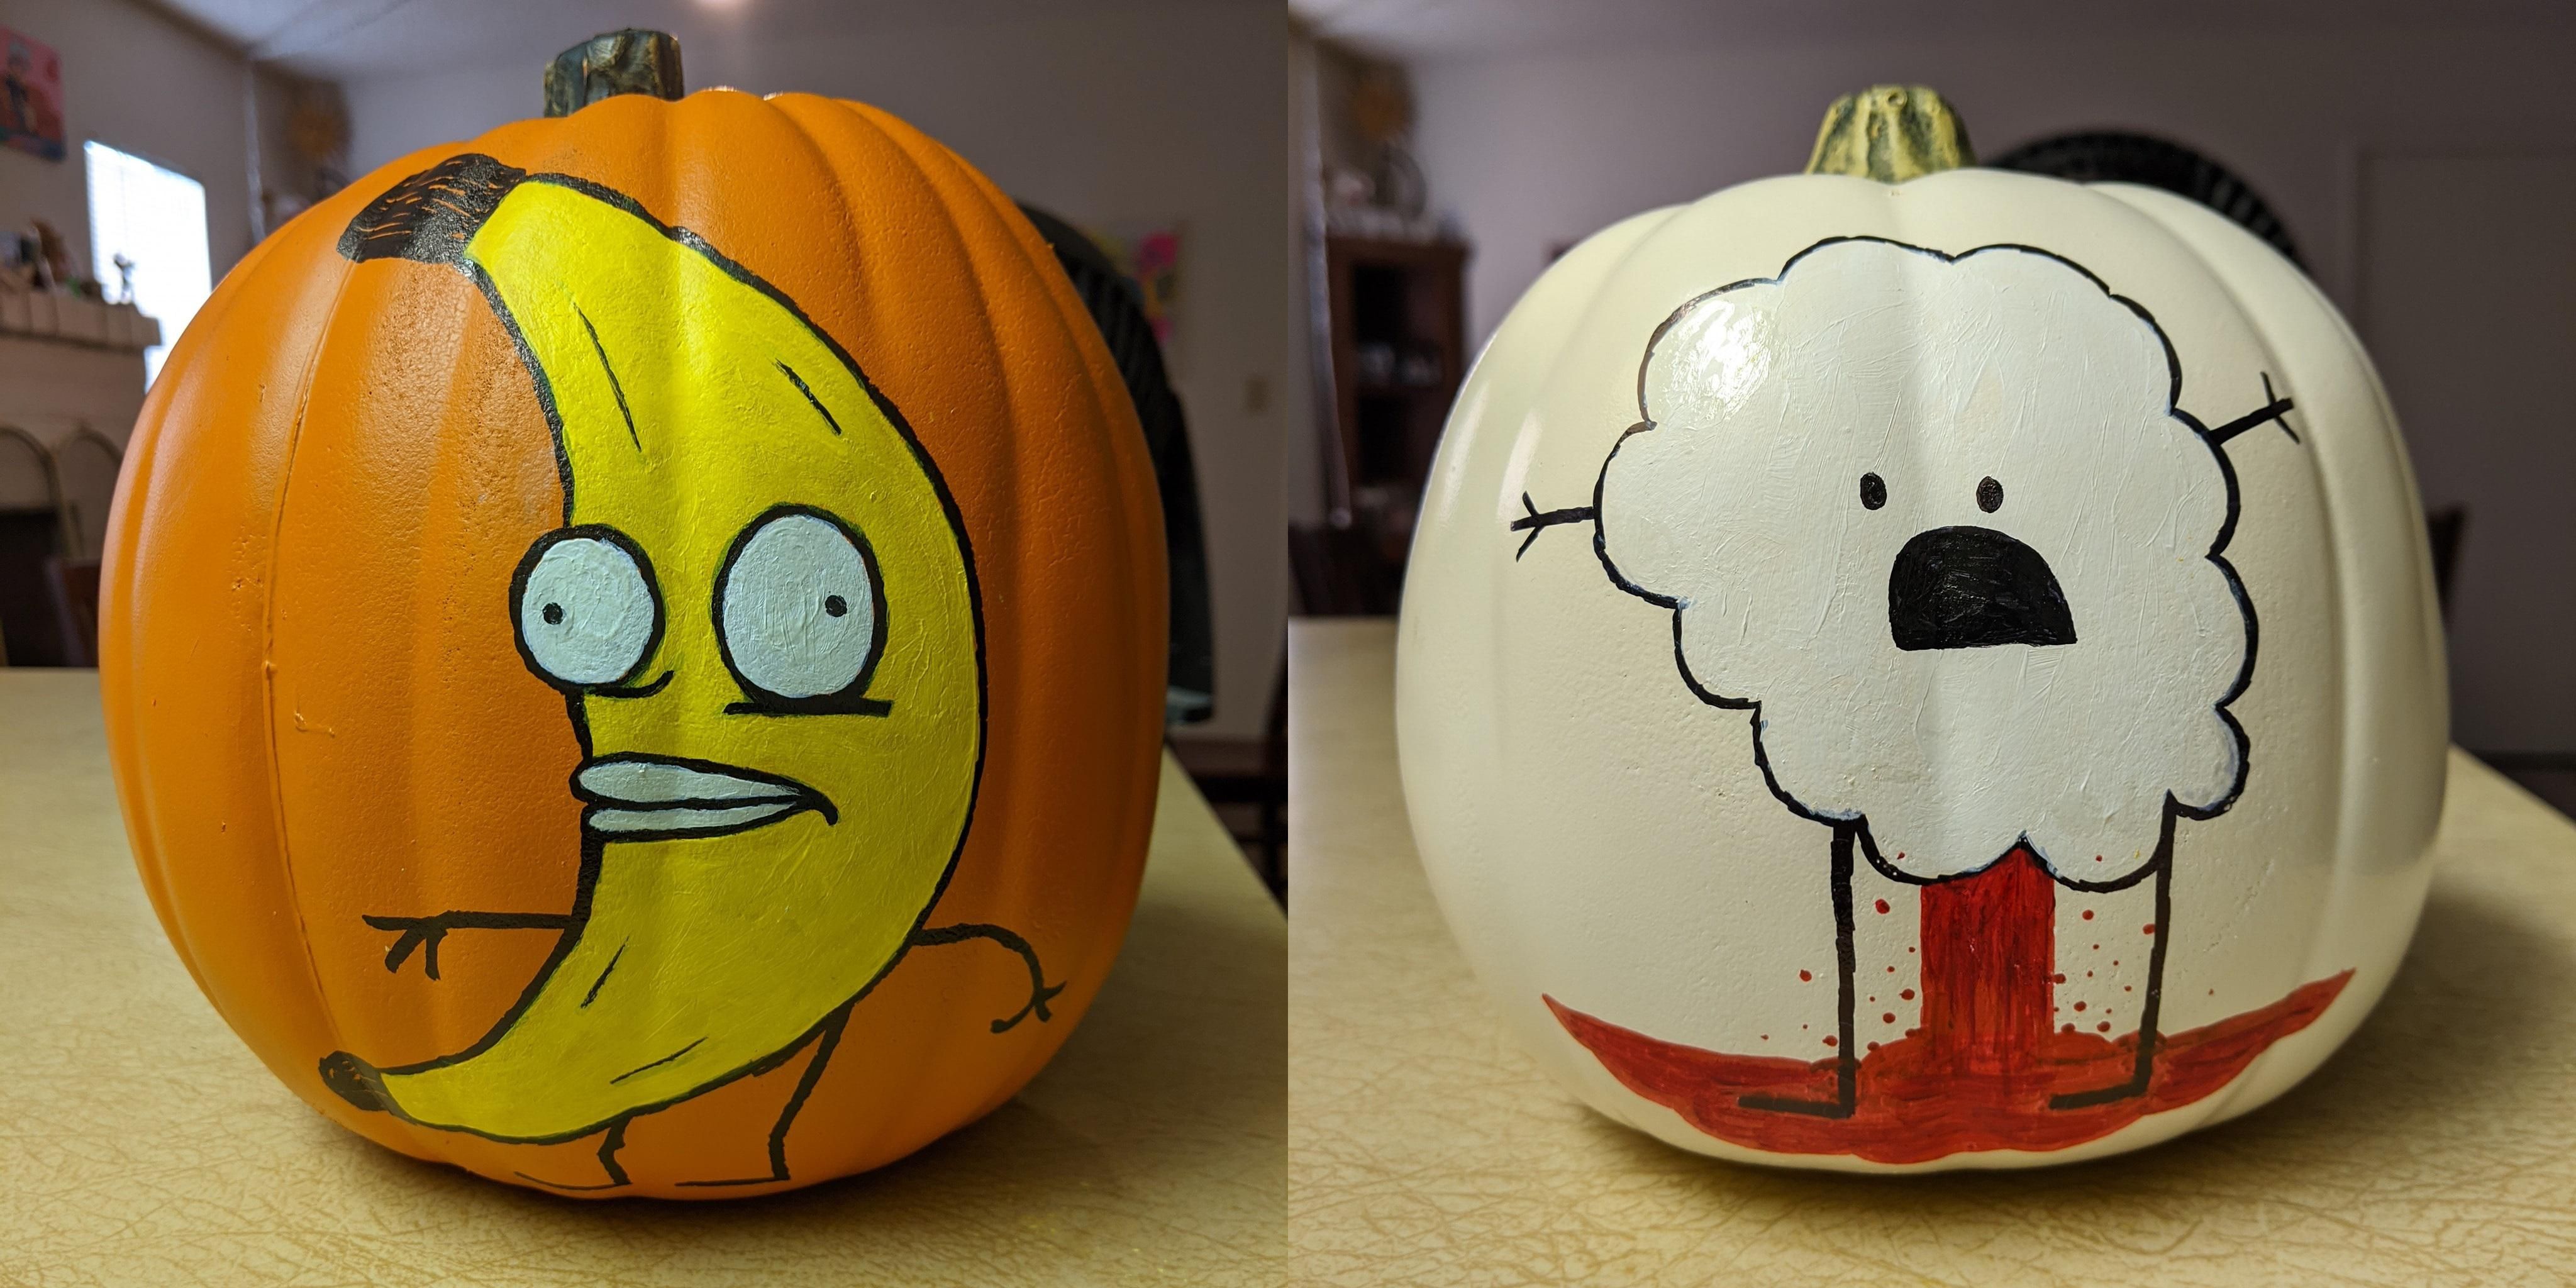 I tried to decorate pumpkins for work, but they were Rejected.